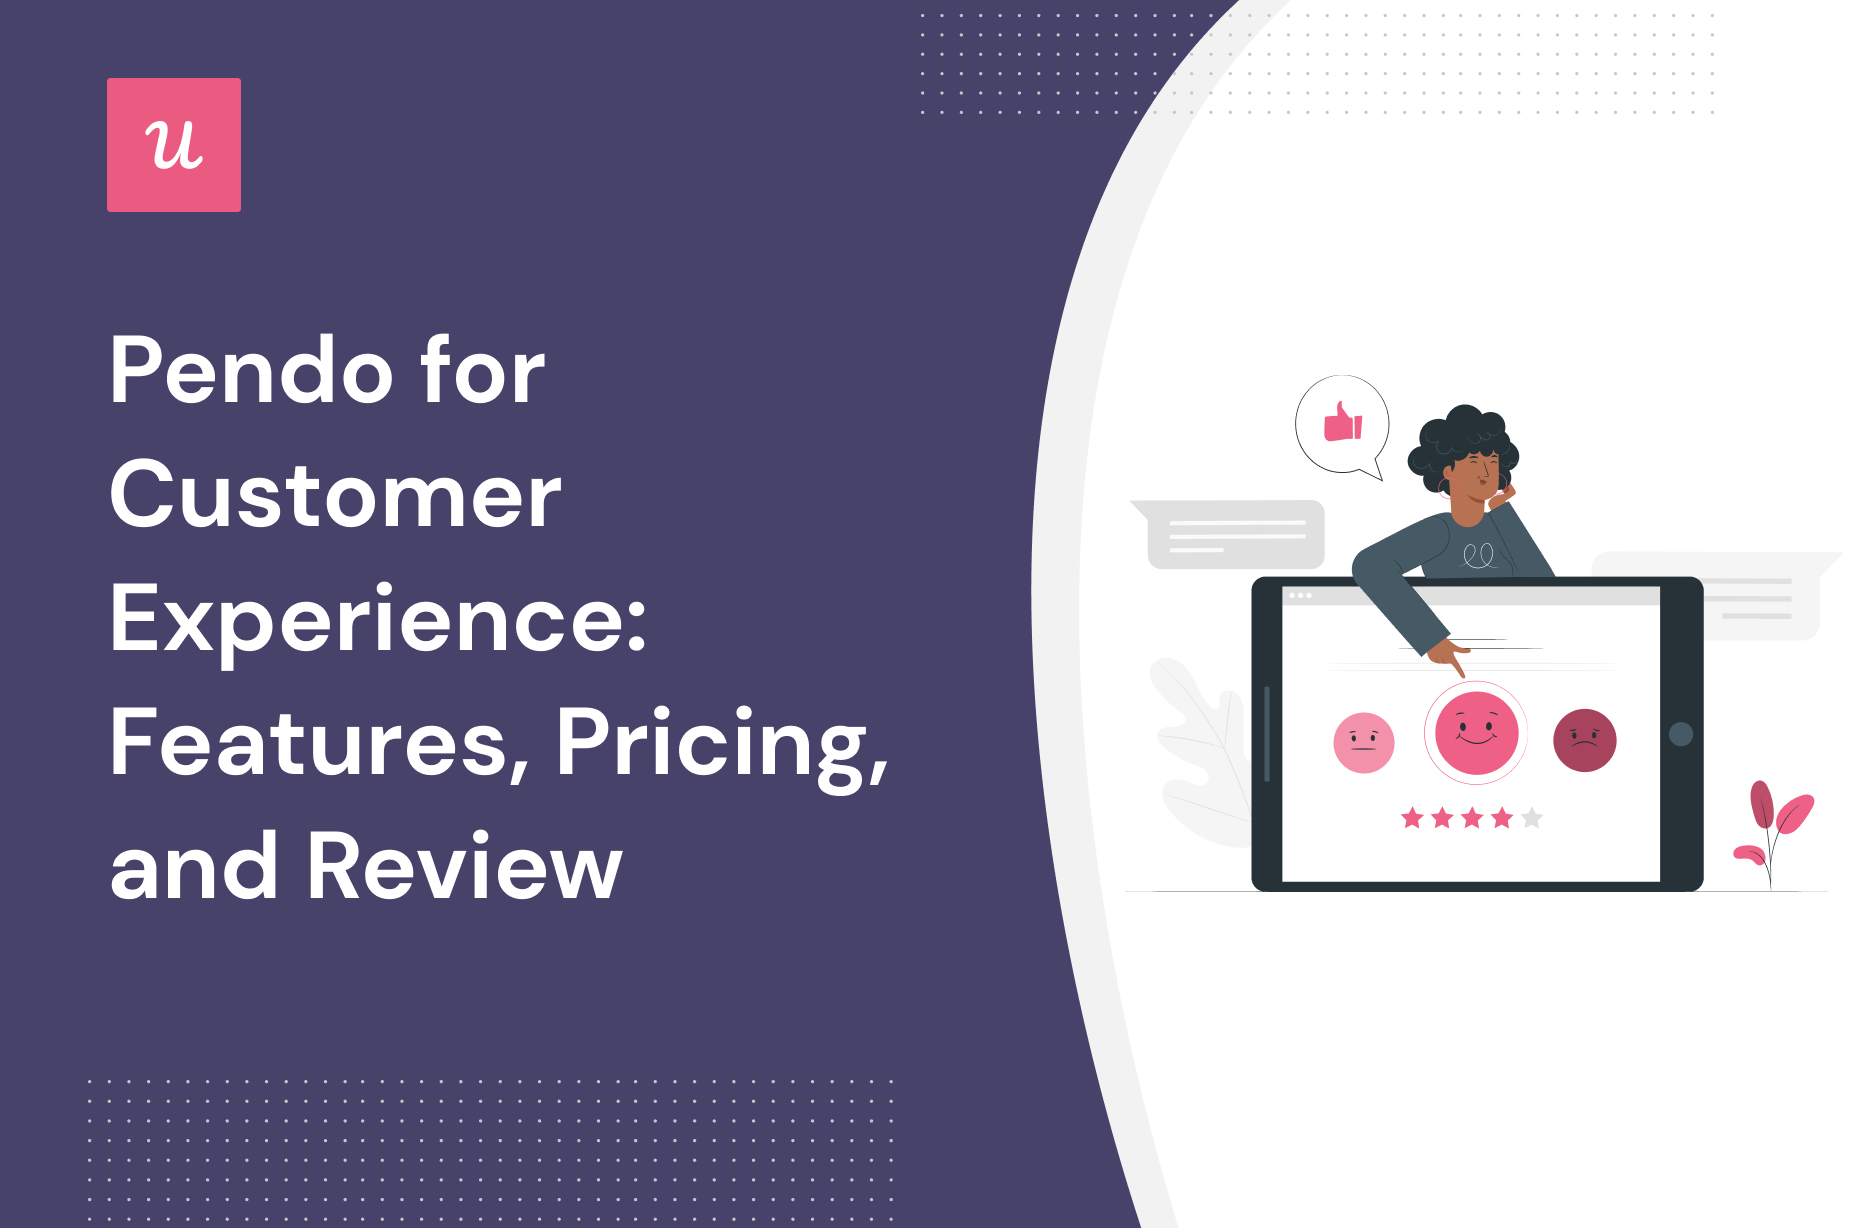 Pendo for Customer Experience: Features, Pricing, and Review